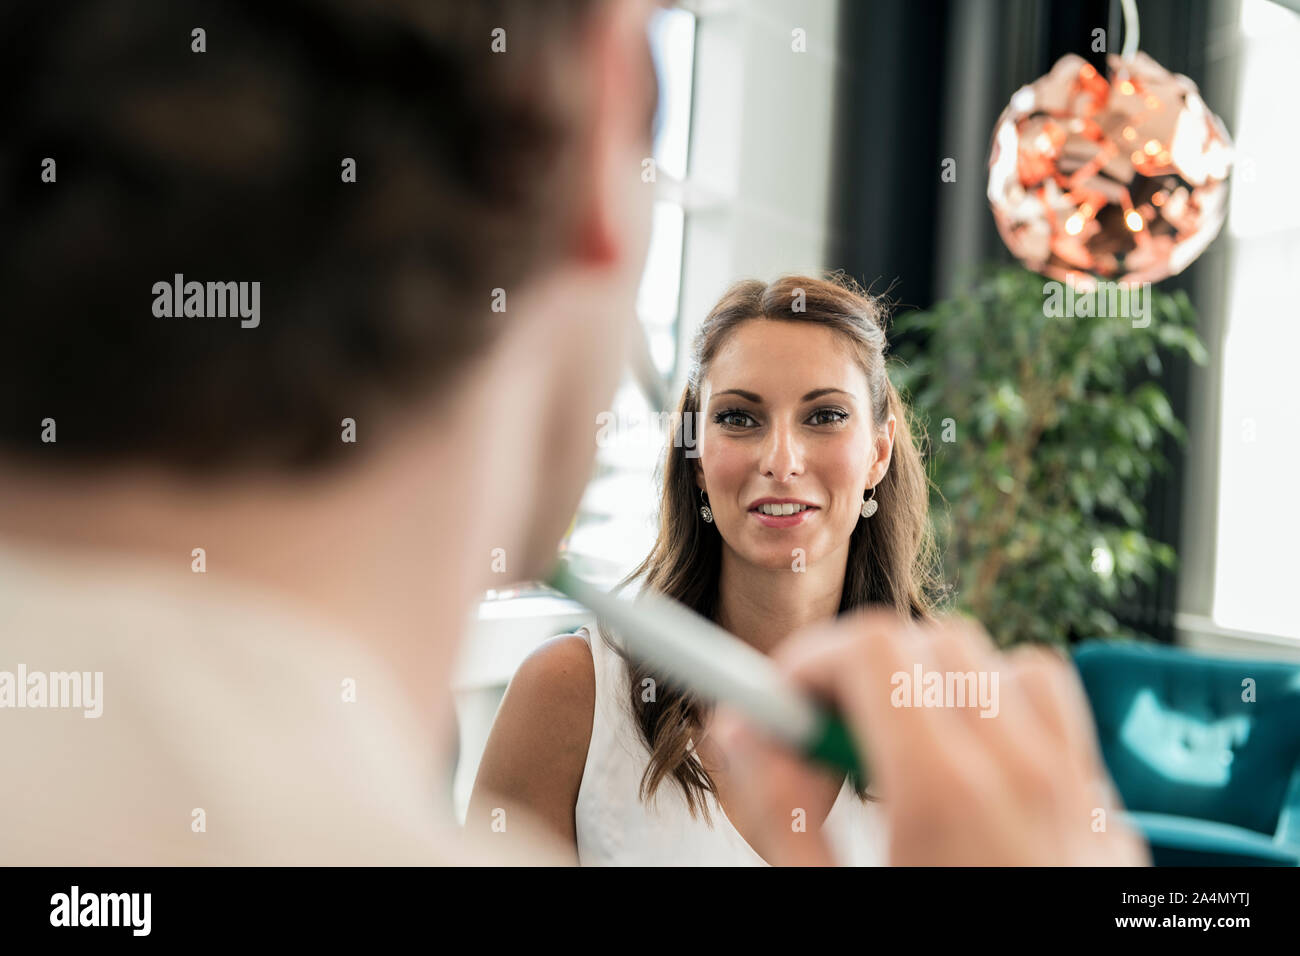 Woman at business meeting Stock Photo